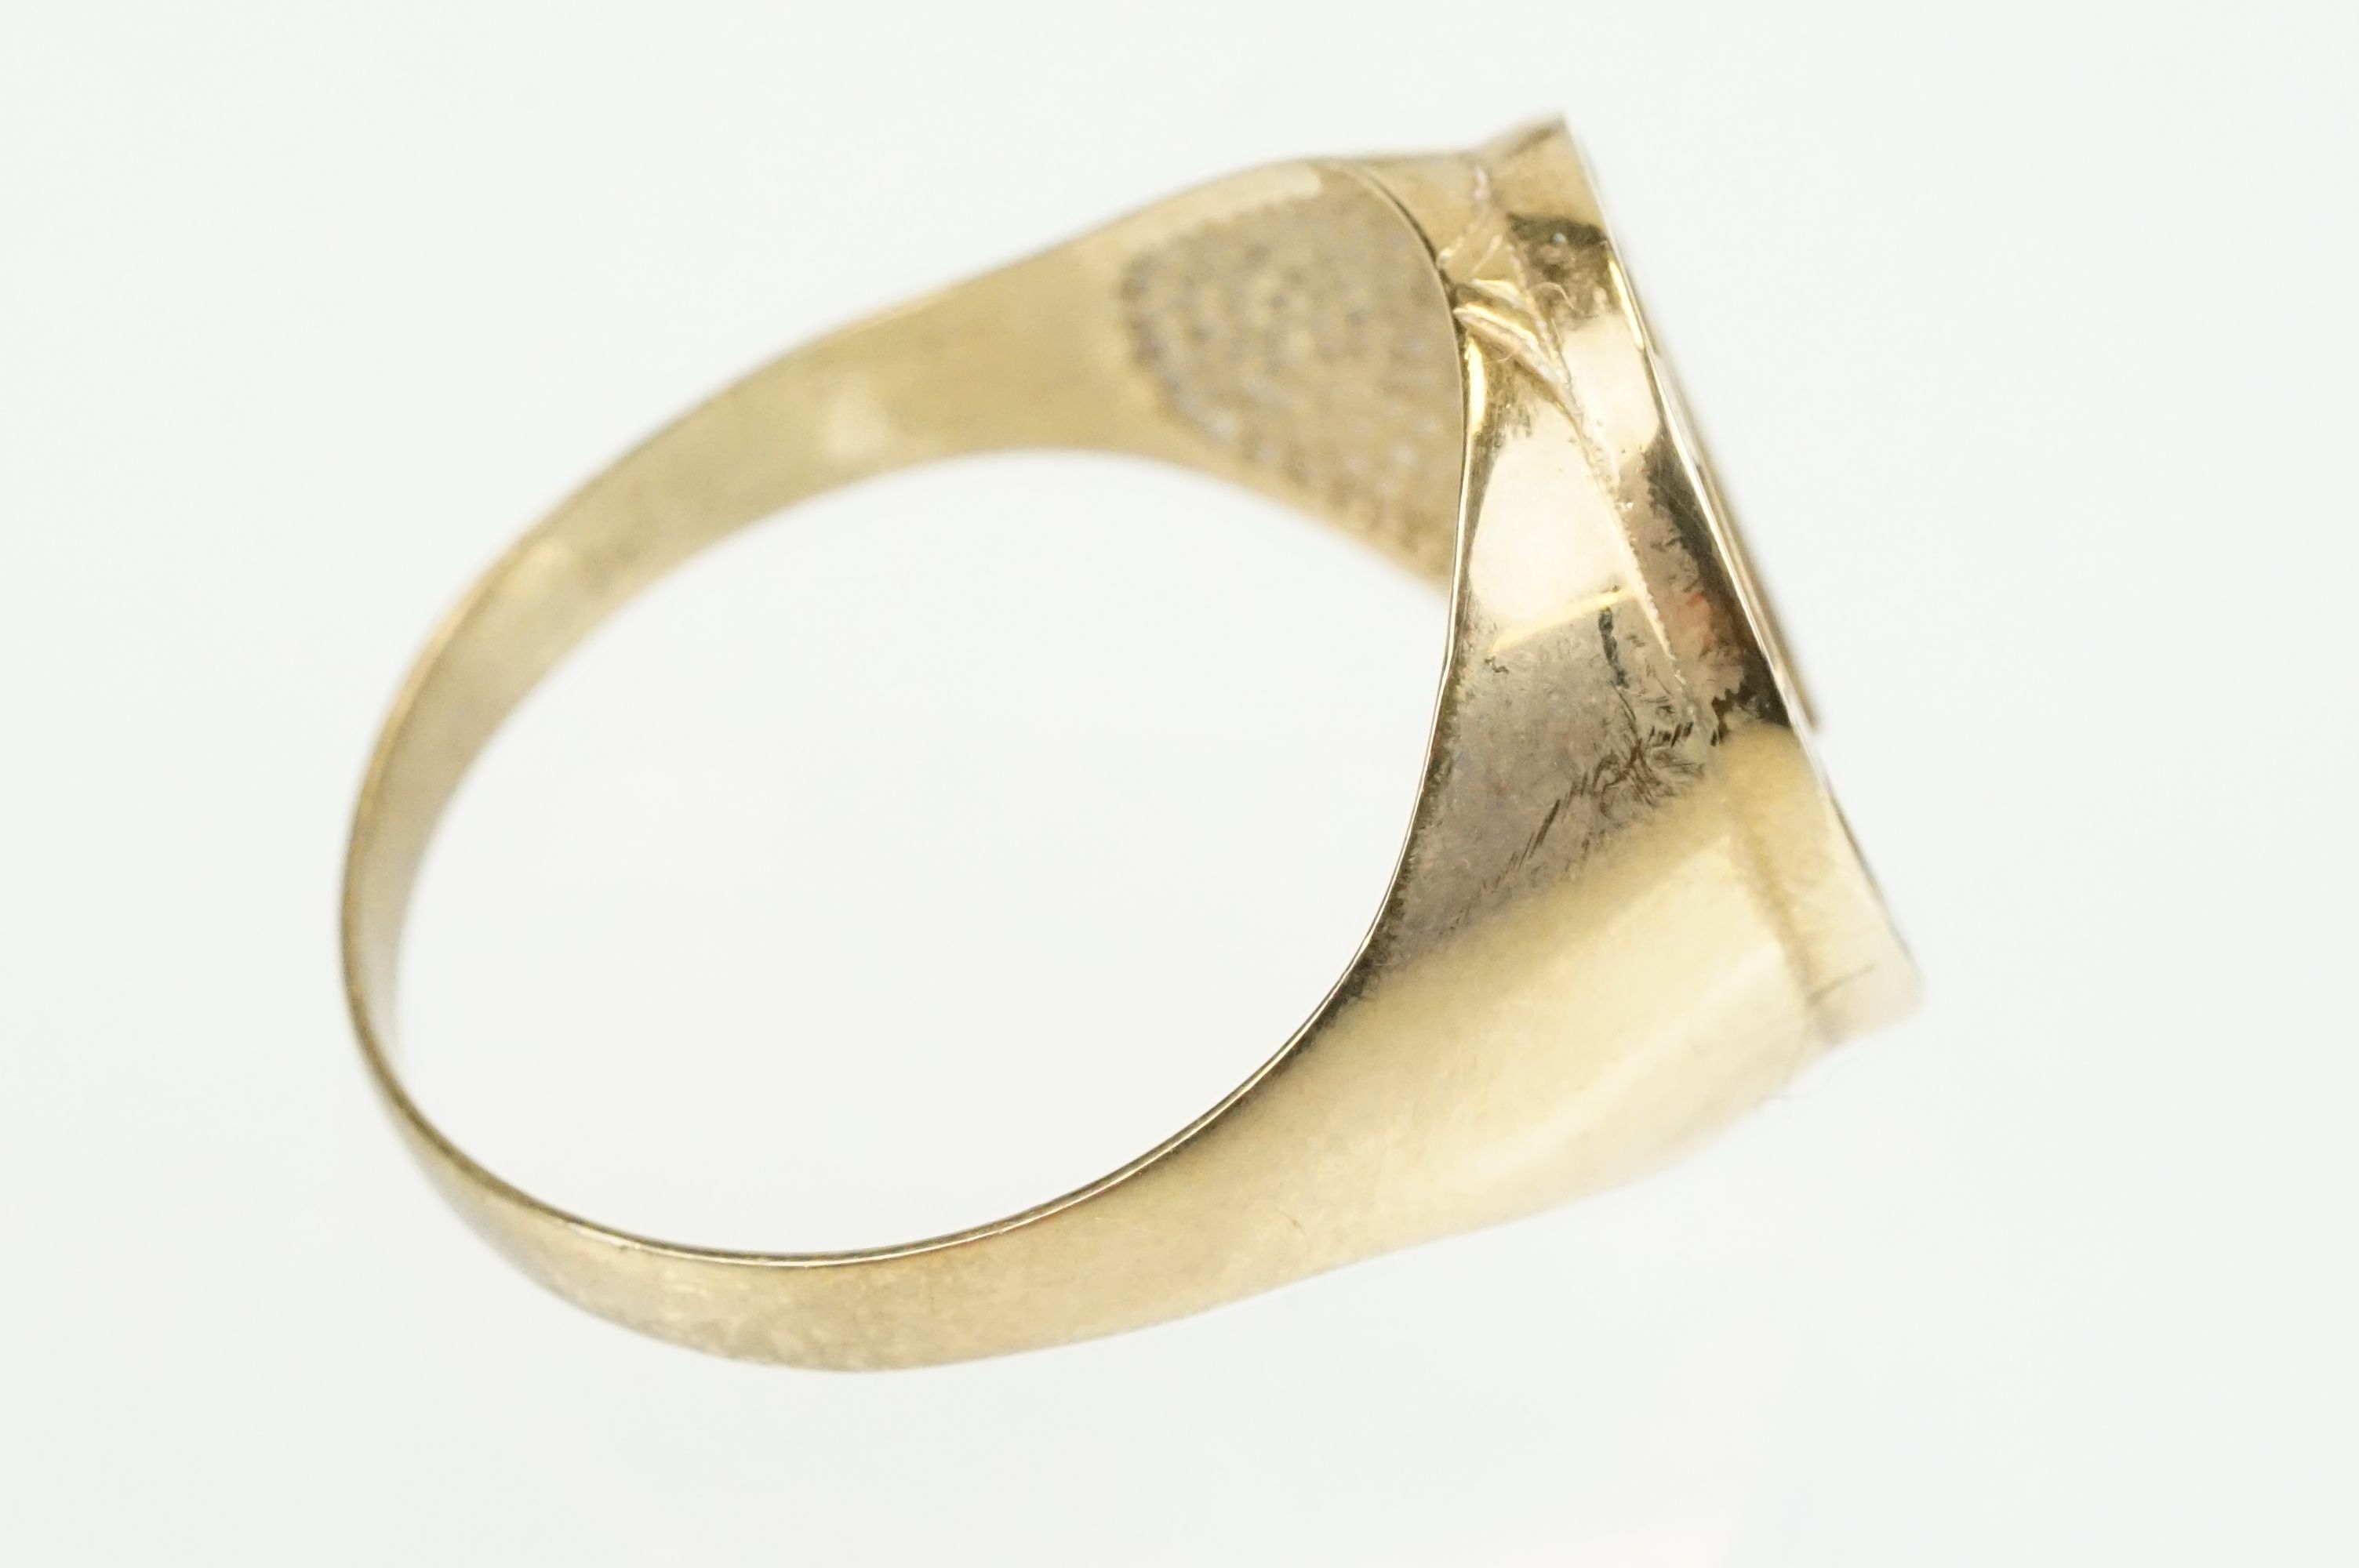 9ct gold horse shoe ring with moulded details. Hallmarked present but rubbed. Size S.5. - Image 5 of 8